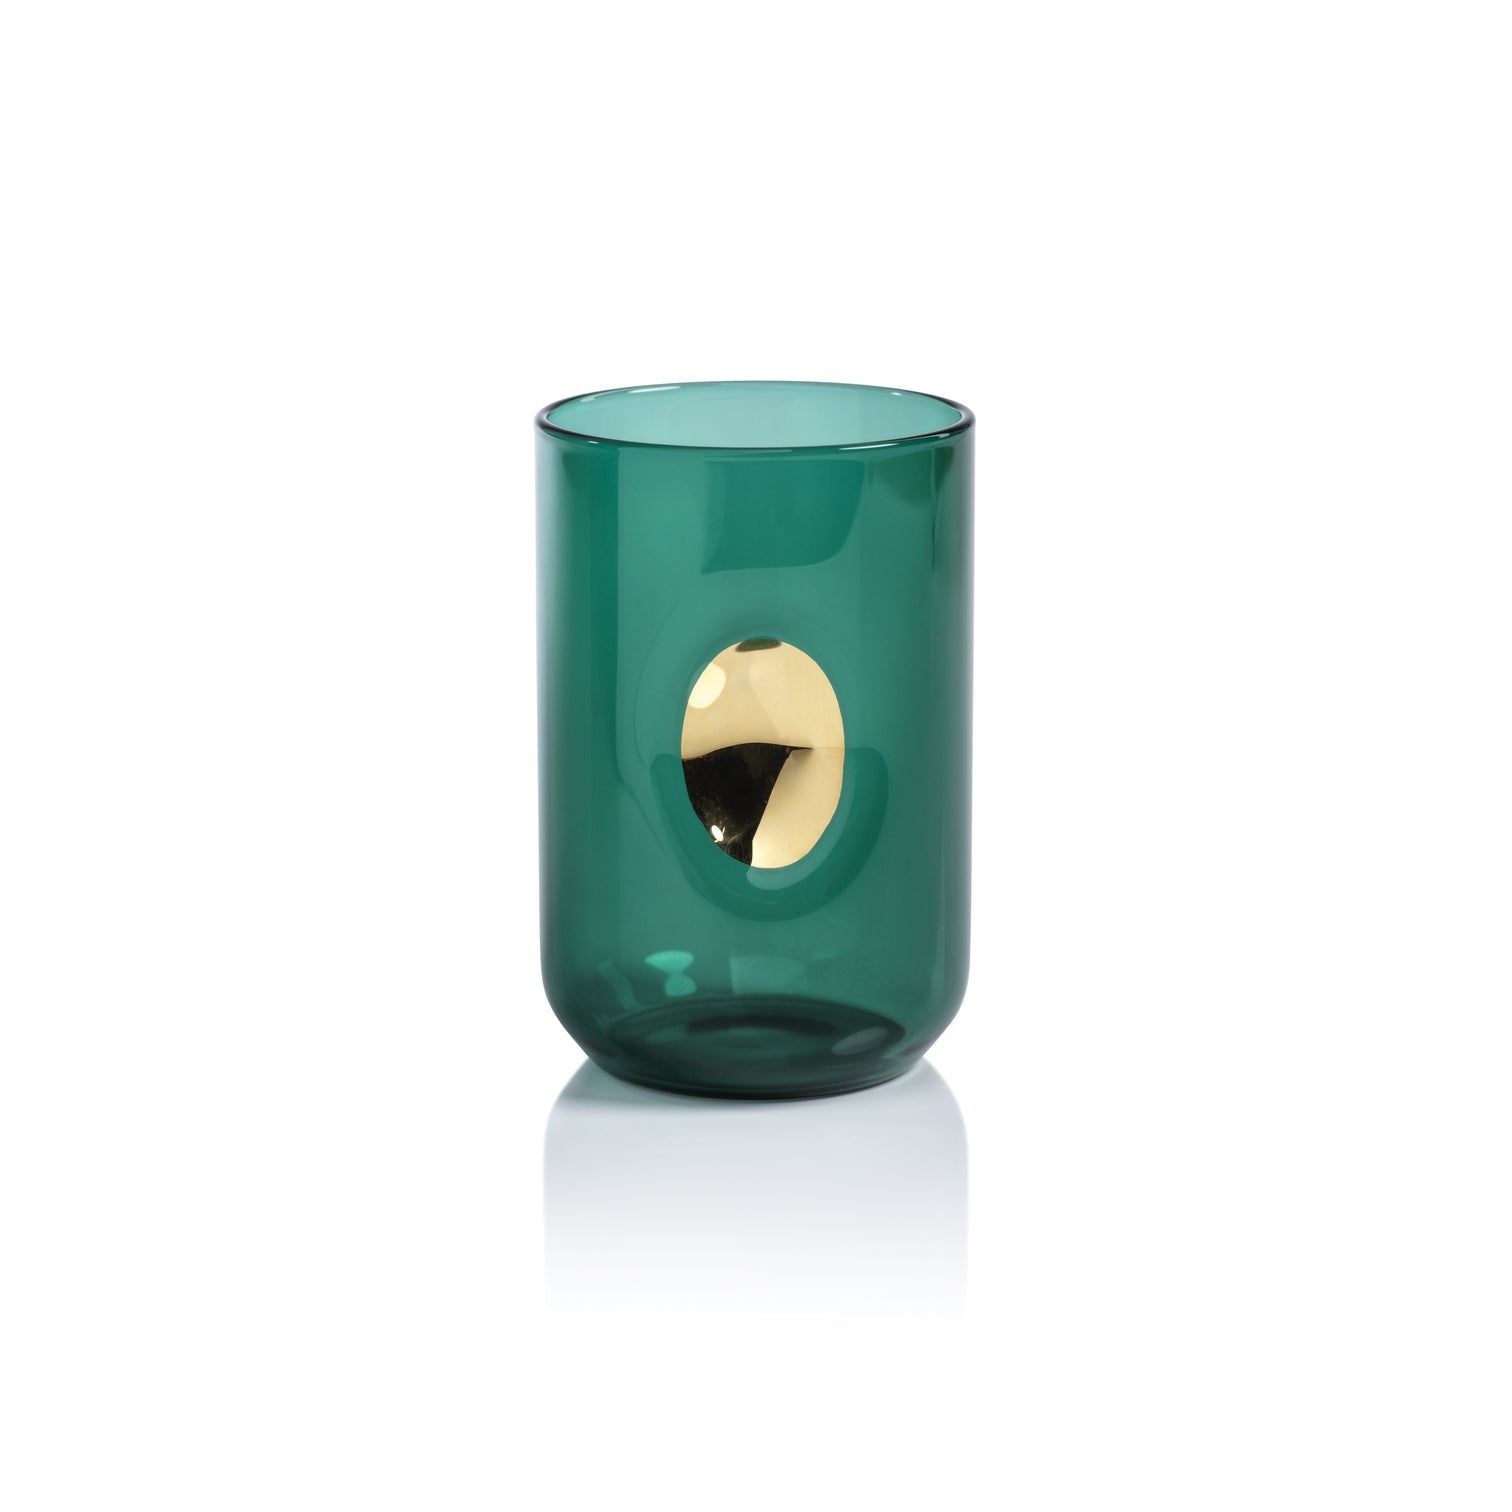 Aperitivo Tumbler with Gold Accent - Emerald Teal - Set of 4